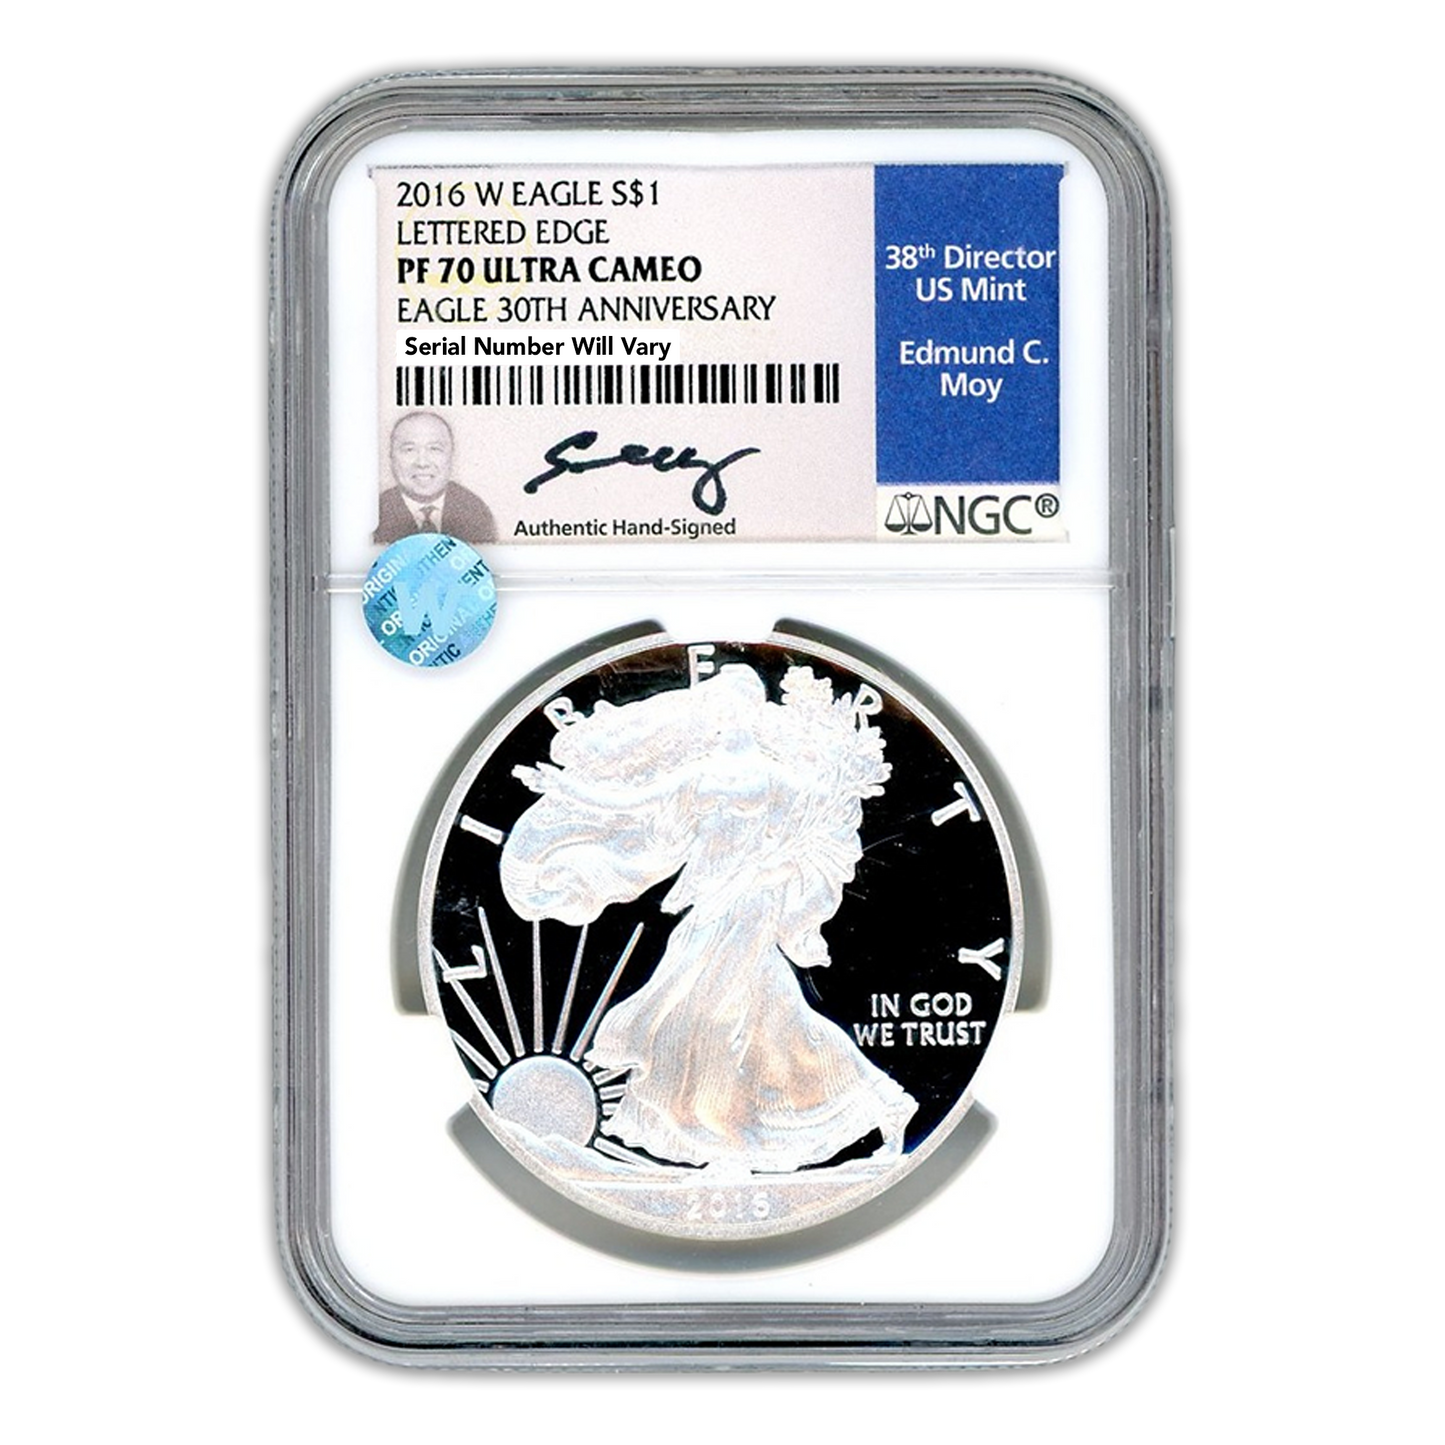 2016 W Silver Eagle West Point - 30th Anniversary - Lettered Edge - Moy Signature Label - NGC PF70 UC